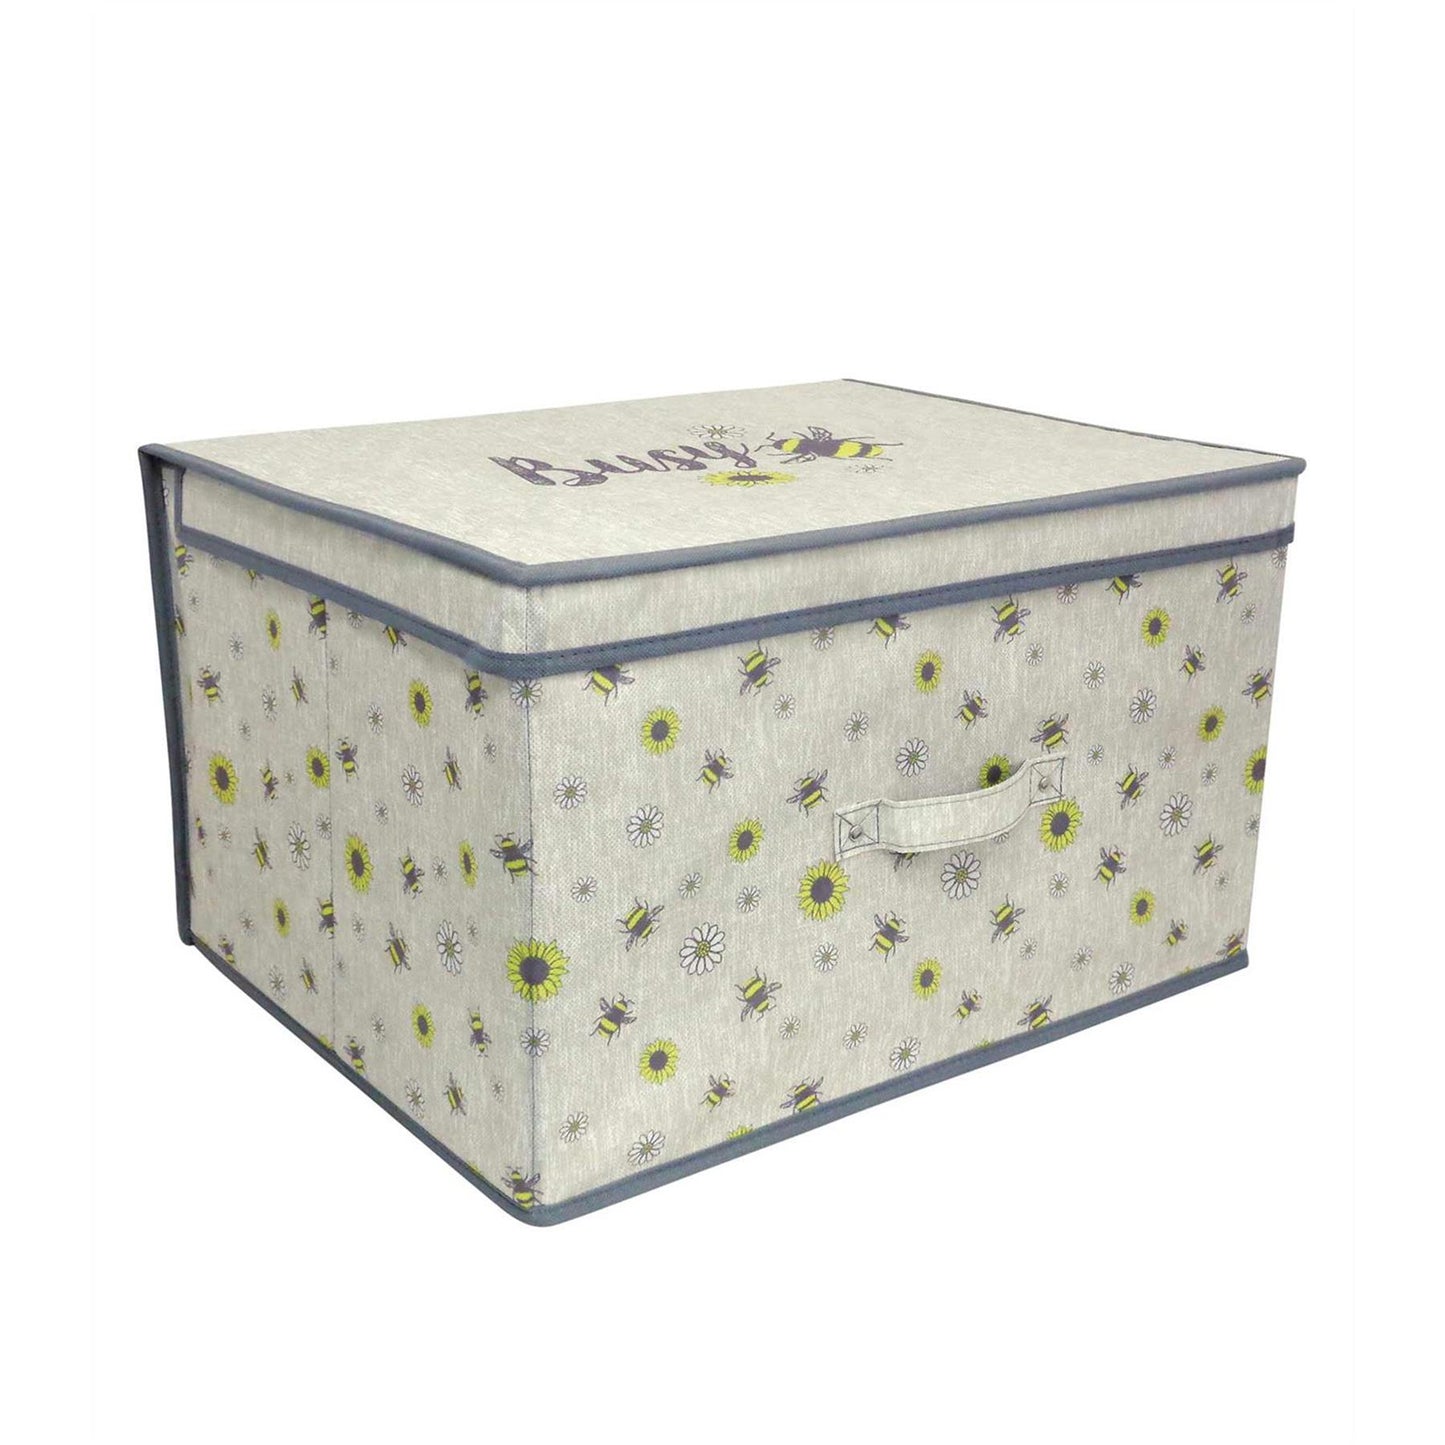 Busy Bee Storage Box by The Magic Toy Shop - UKBuyZone